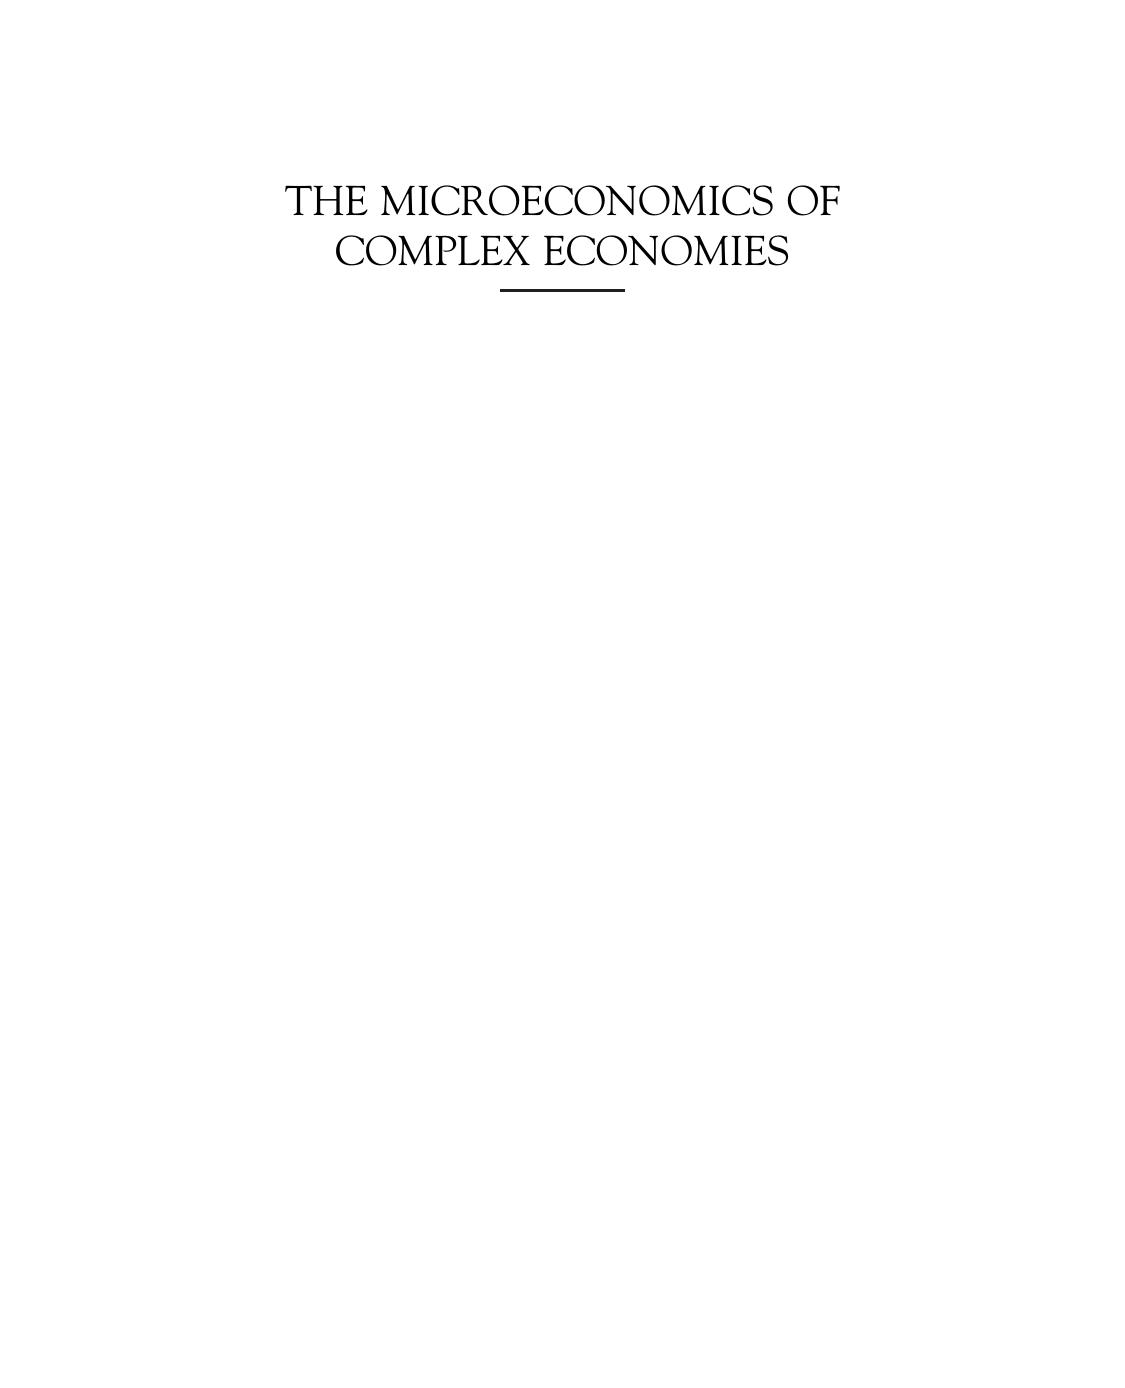 The Microeconomics of Complex Economies. Evolutionary, Institutional, and Complexity Perspectives 2015